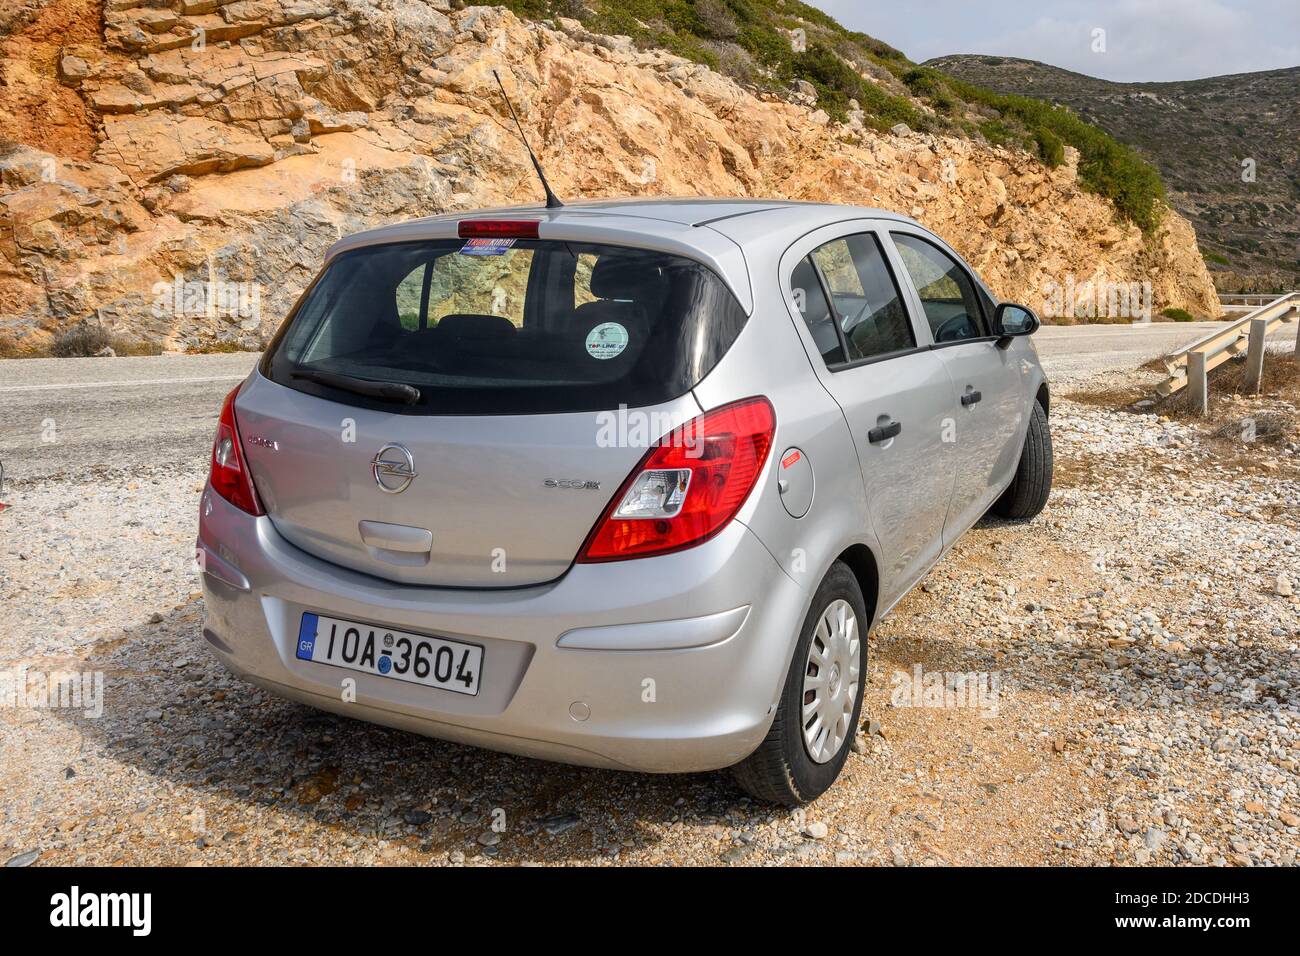 2024 Opel Corsa Facelift Debuts With Updated ICE And EV Models